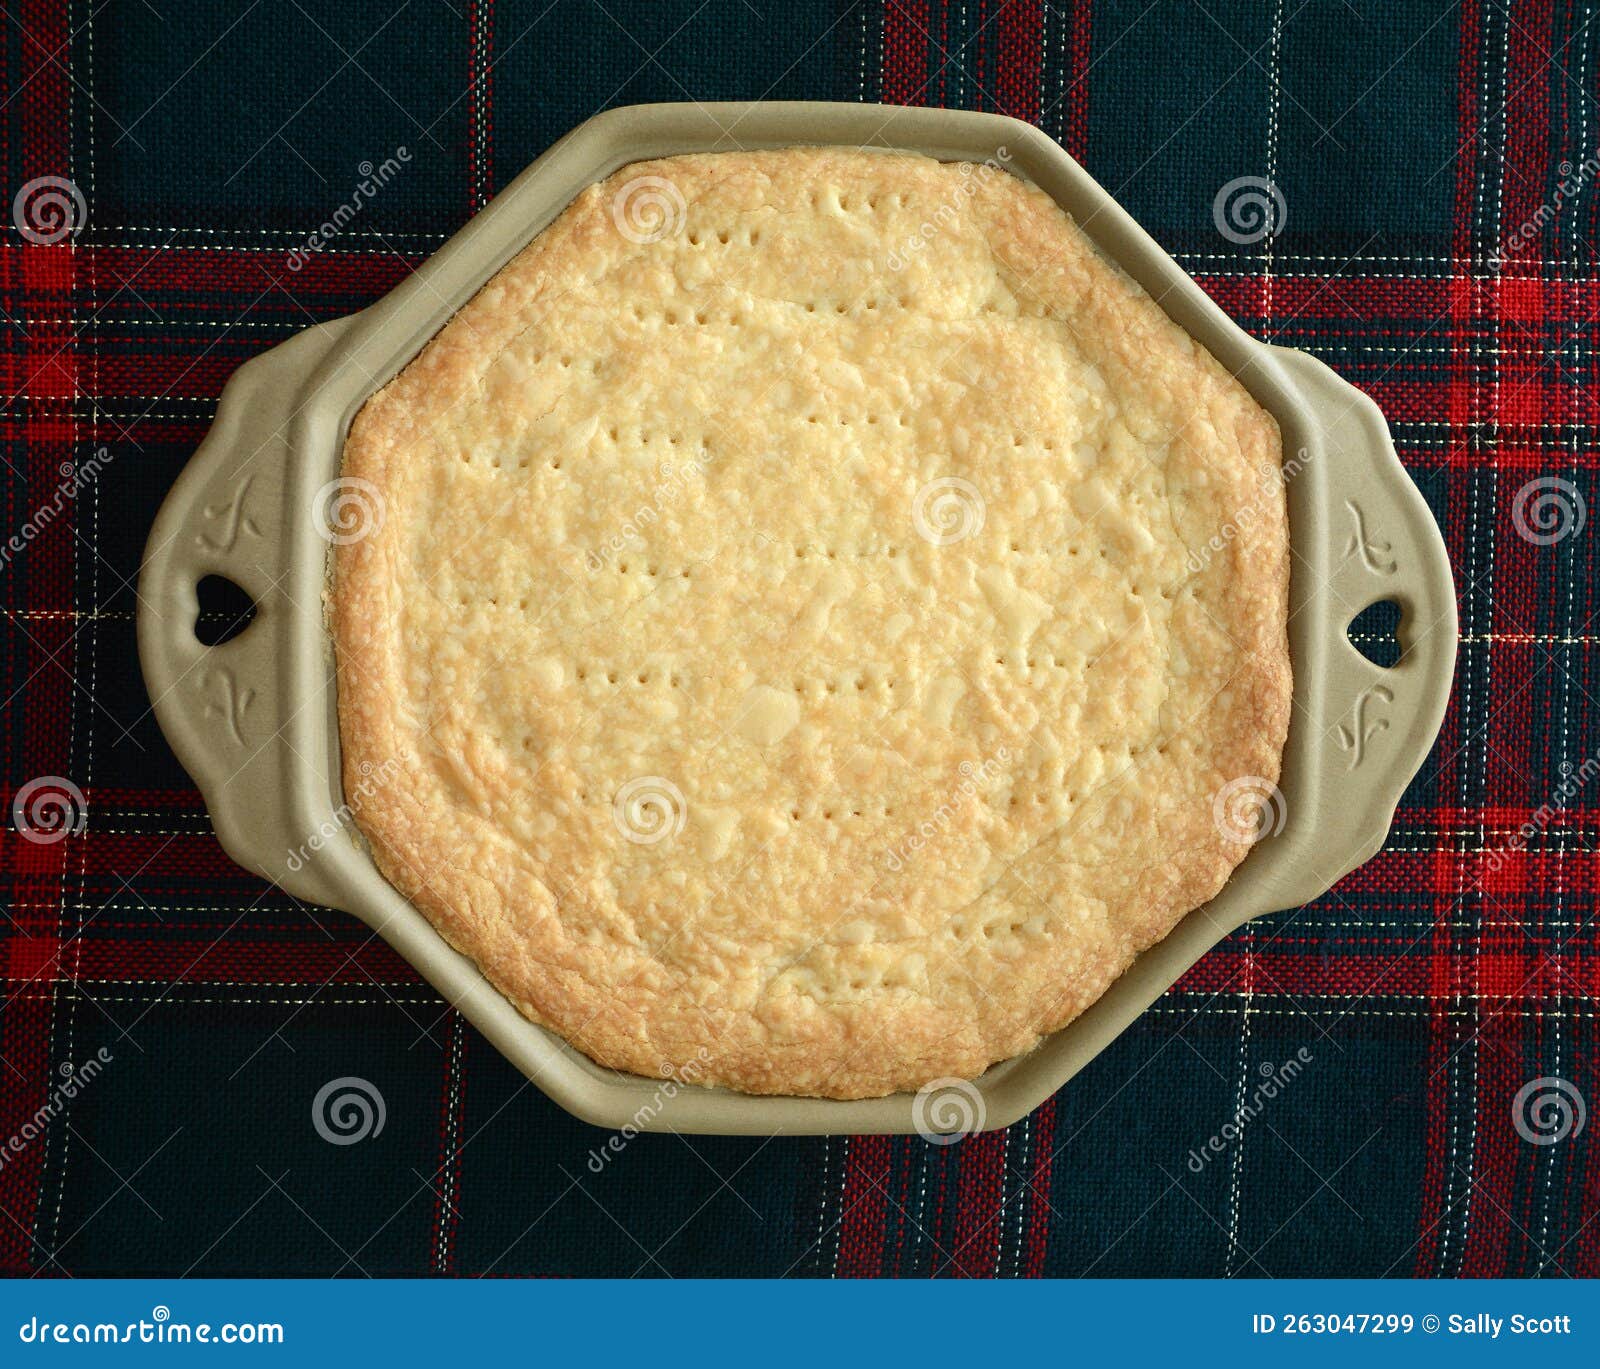 Scottish Shortbread in Stone Mould Stock Image - Image of mold